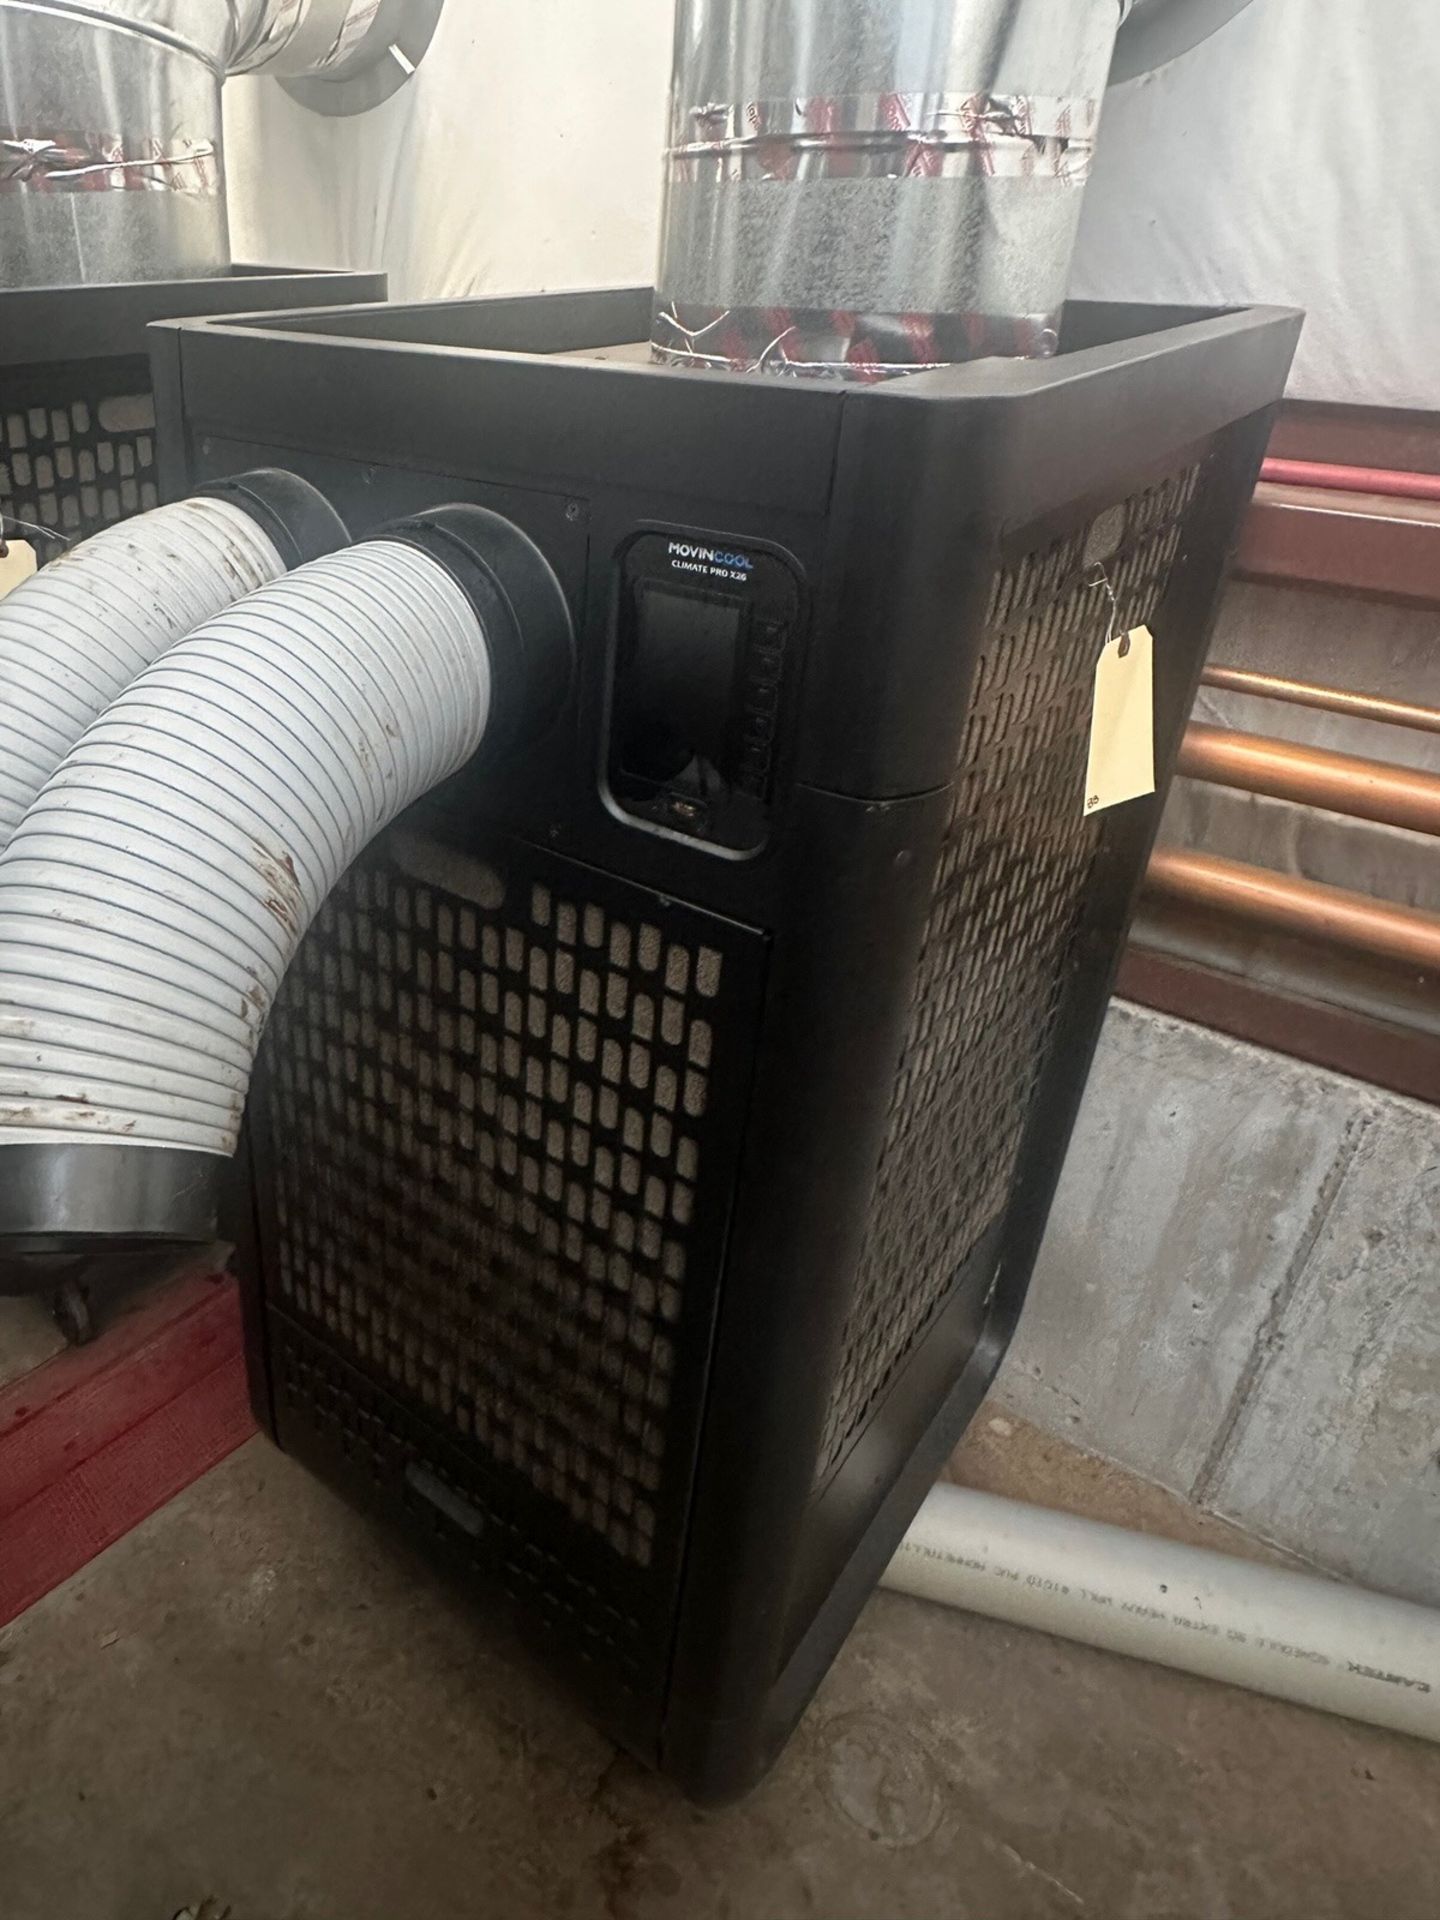 Moving Cool, Work area, Air Conditioner, Climate Pro x26 | Rig Fee $50